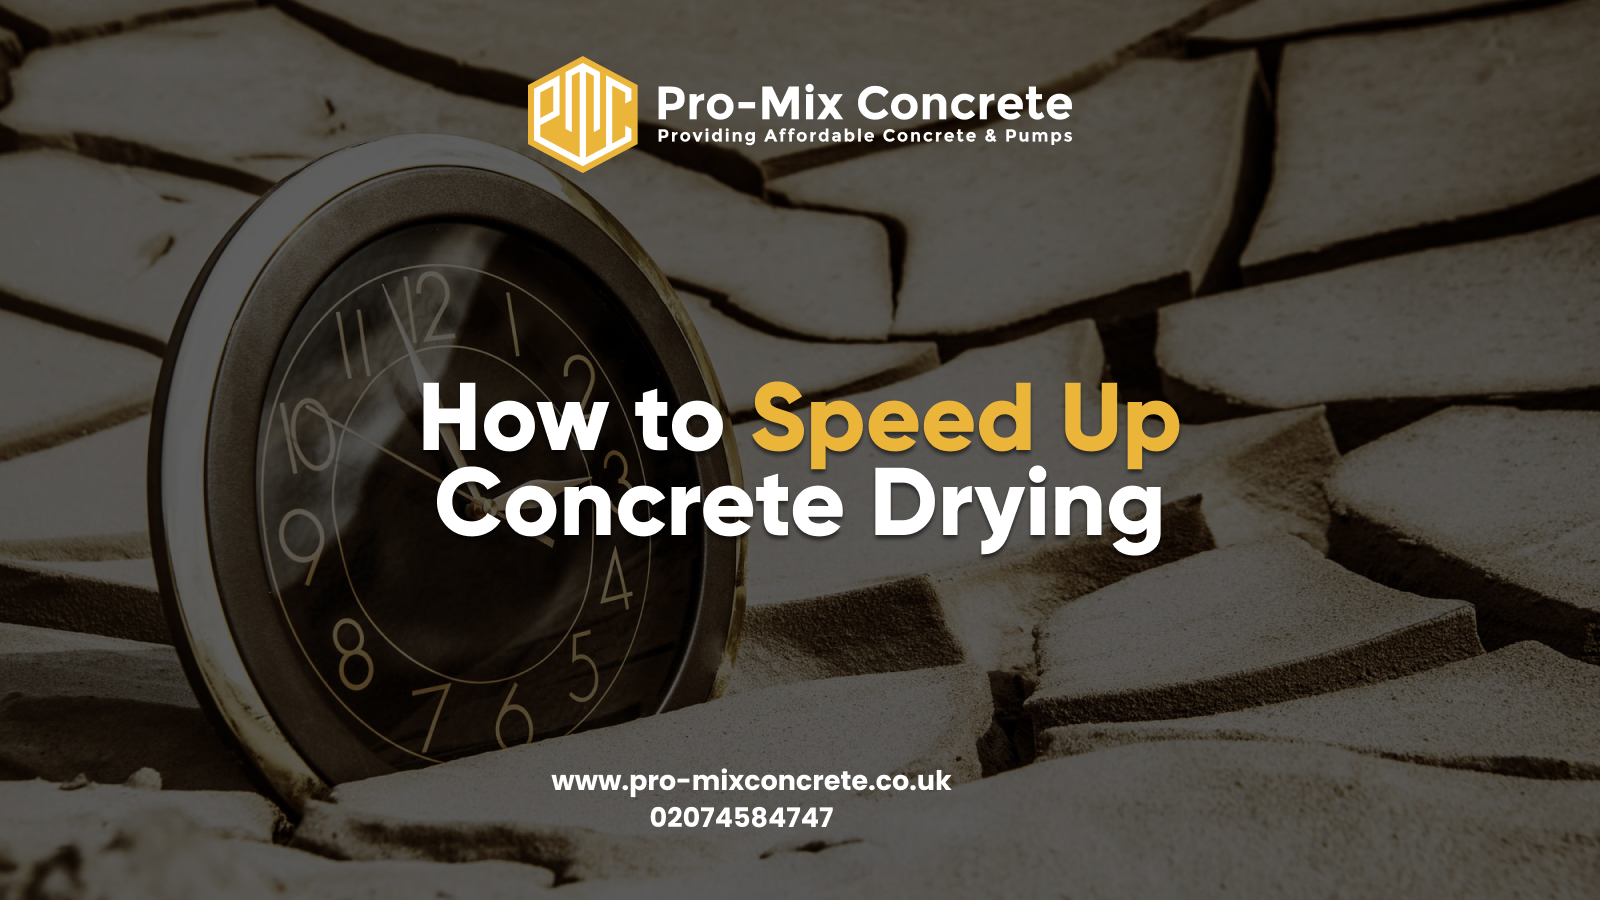 How to Speed Up Concrete Drying